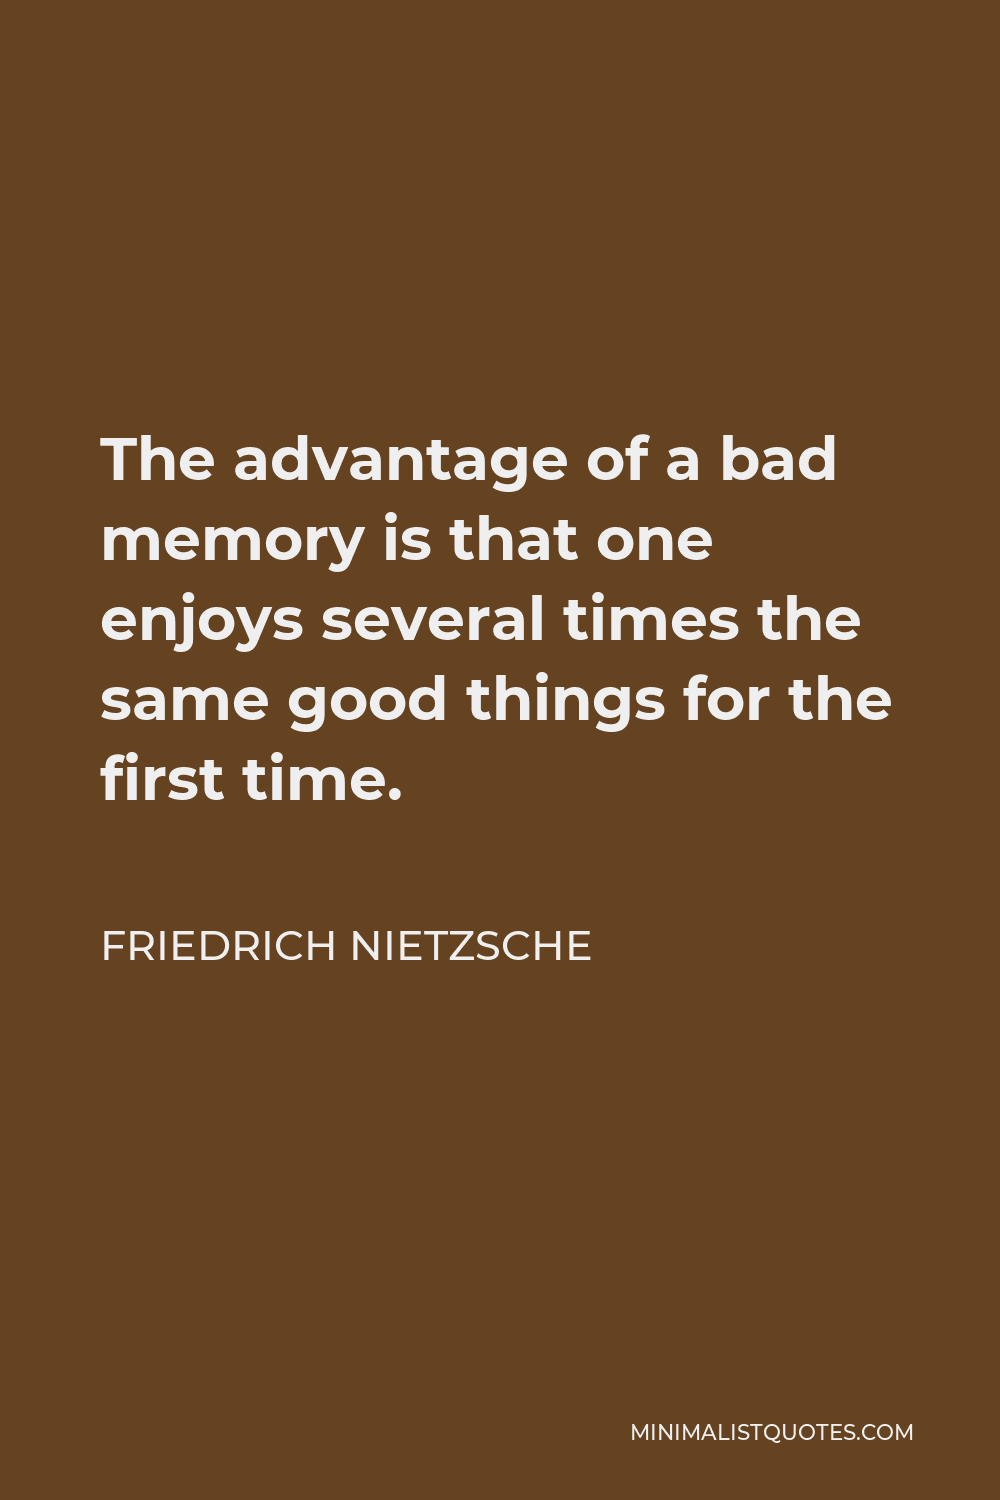 Friedrich Nietzsche Quote - The advantage of a bad memory is that one enjoys several times the same good things for the first time.